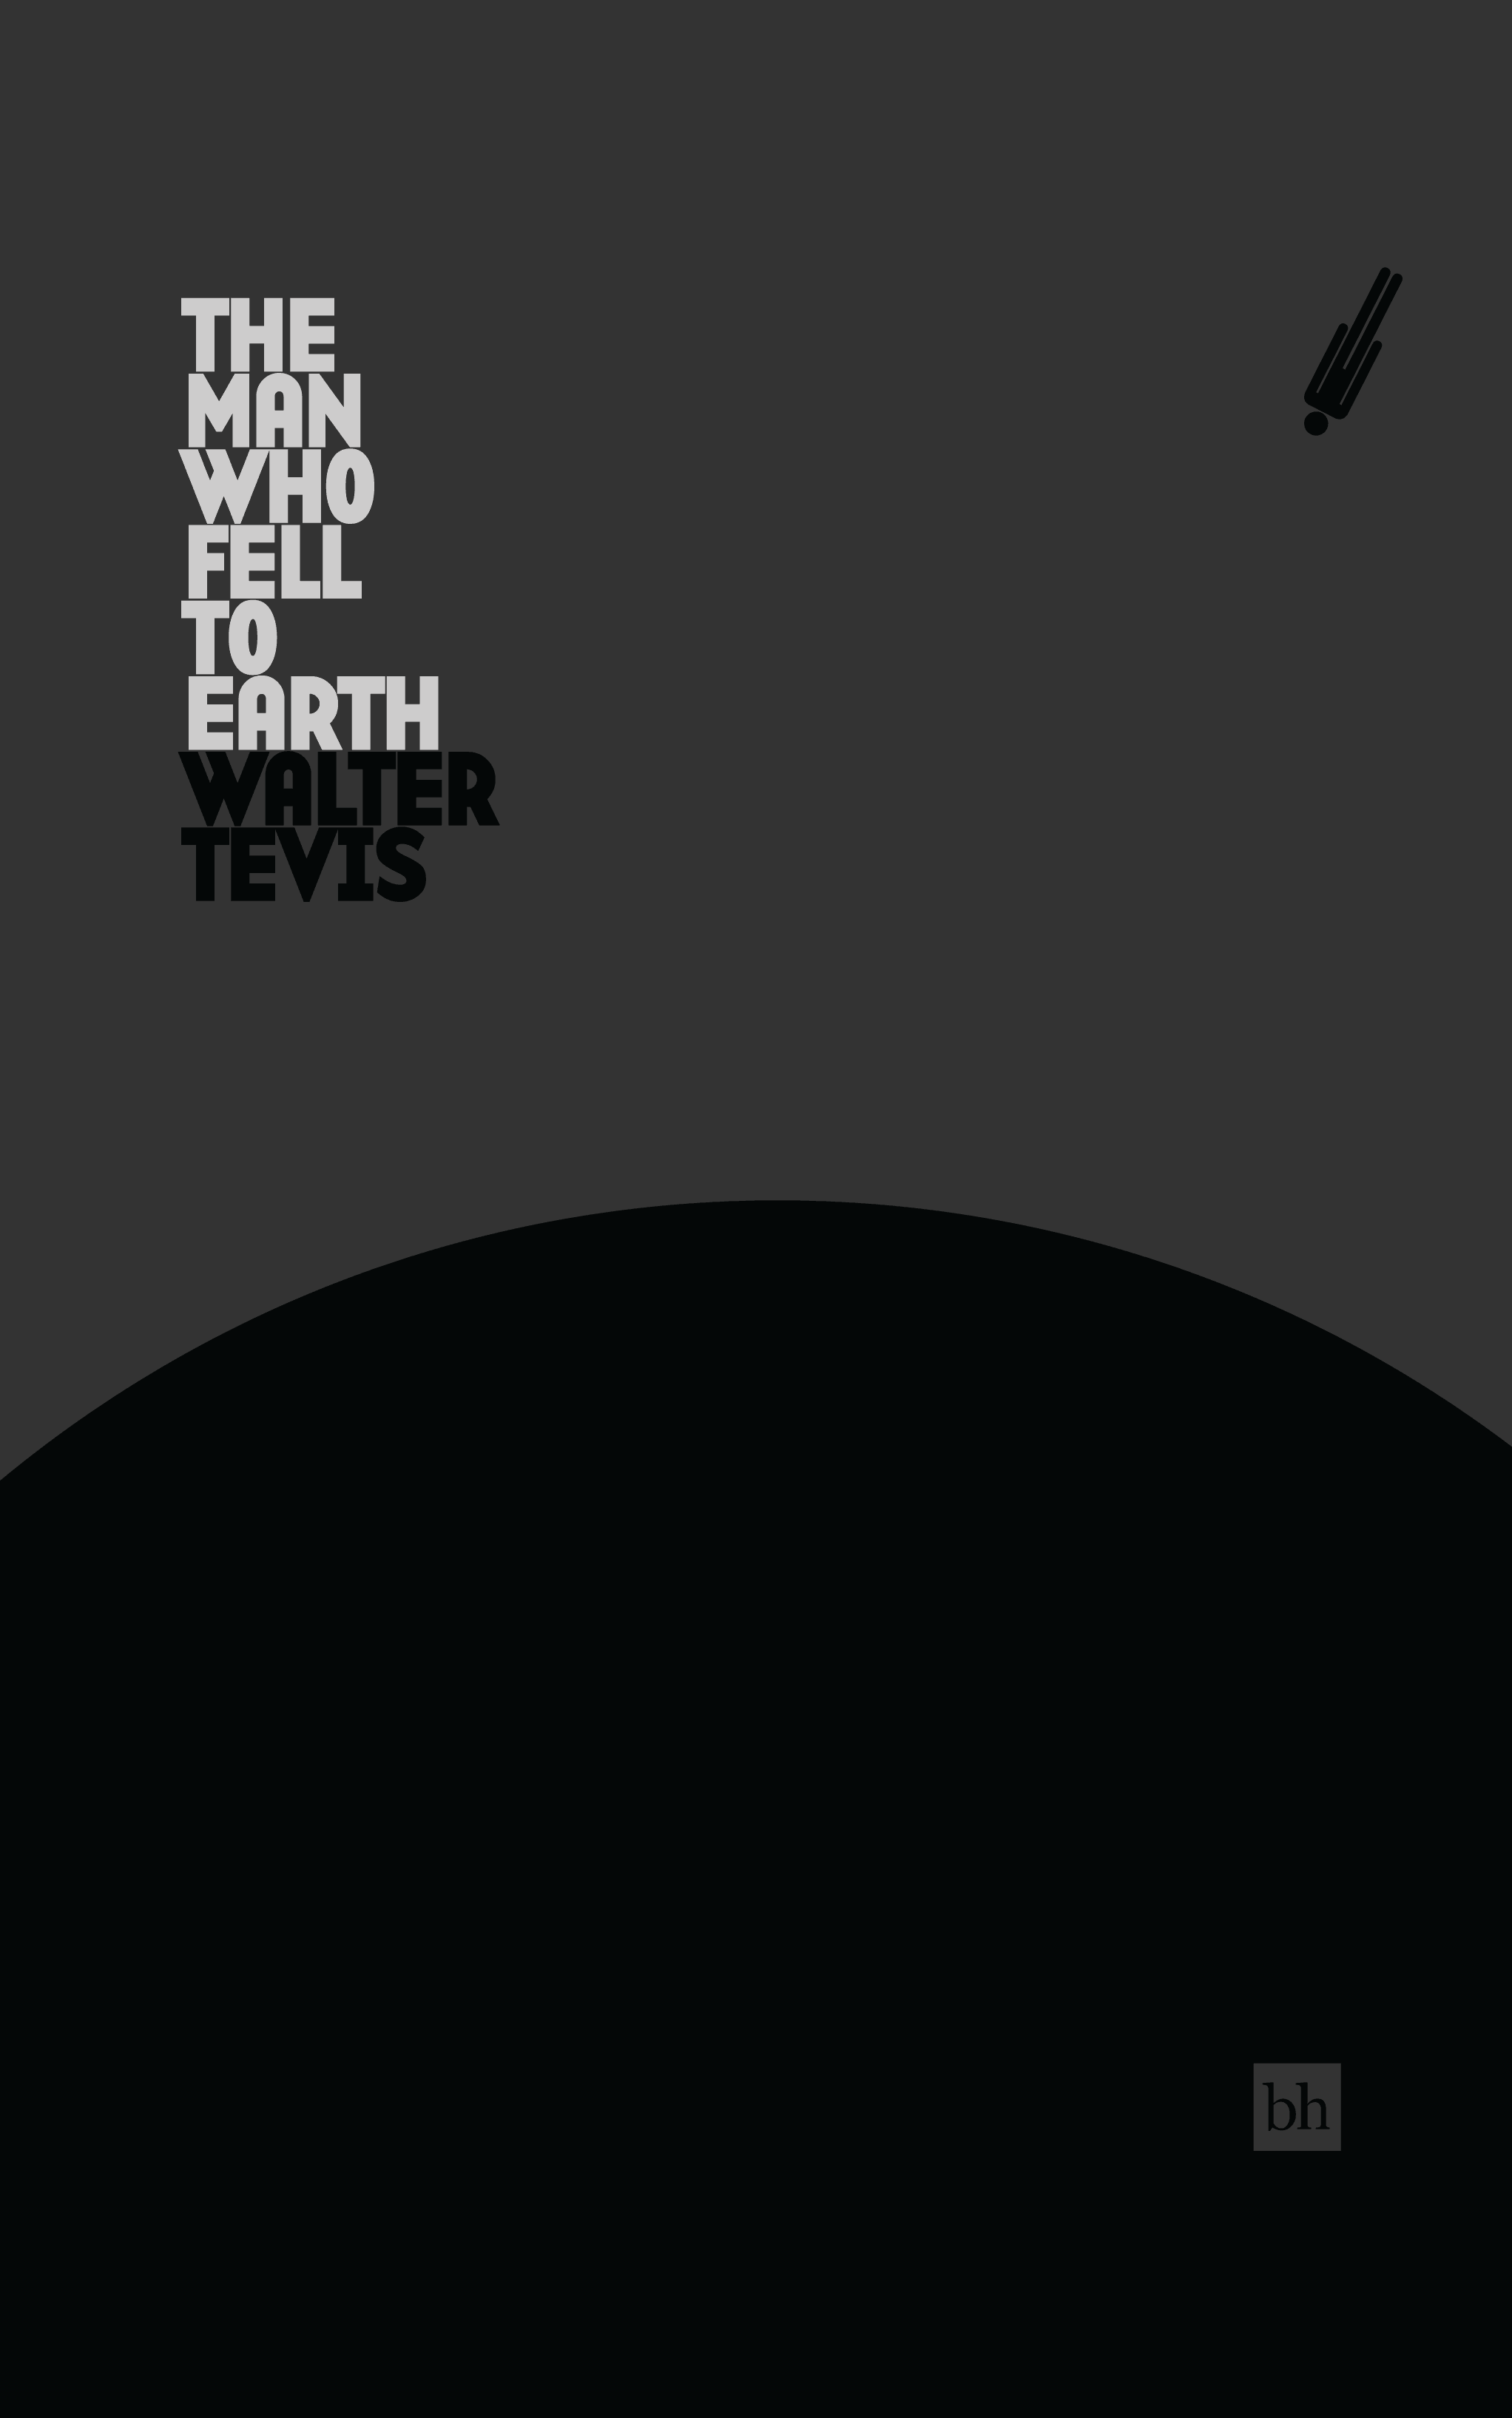 The Man Who Fell To Earth by Walter Tevis